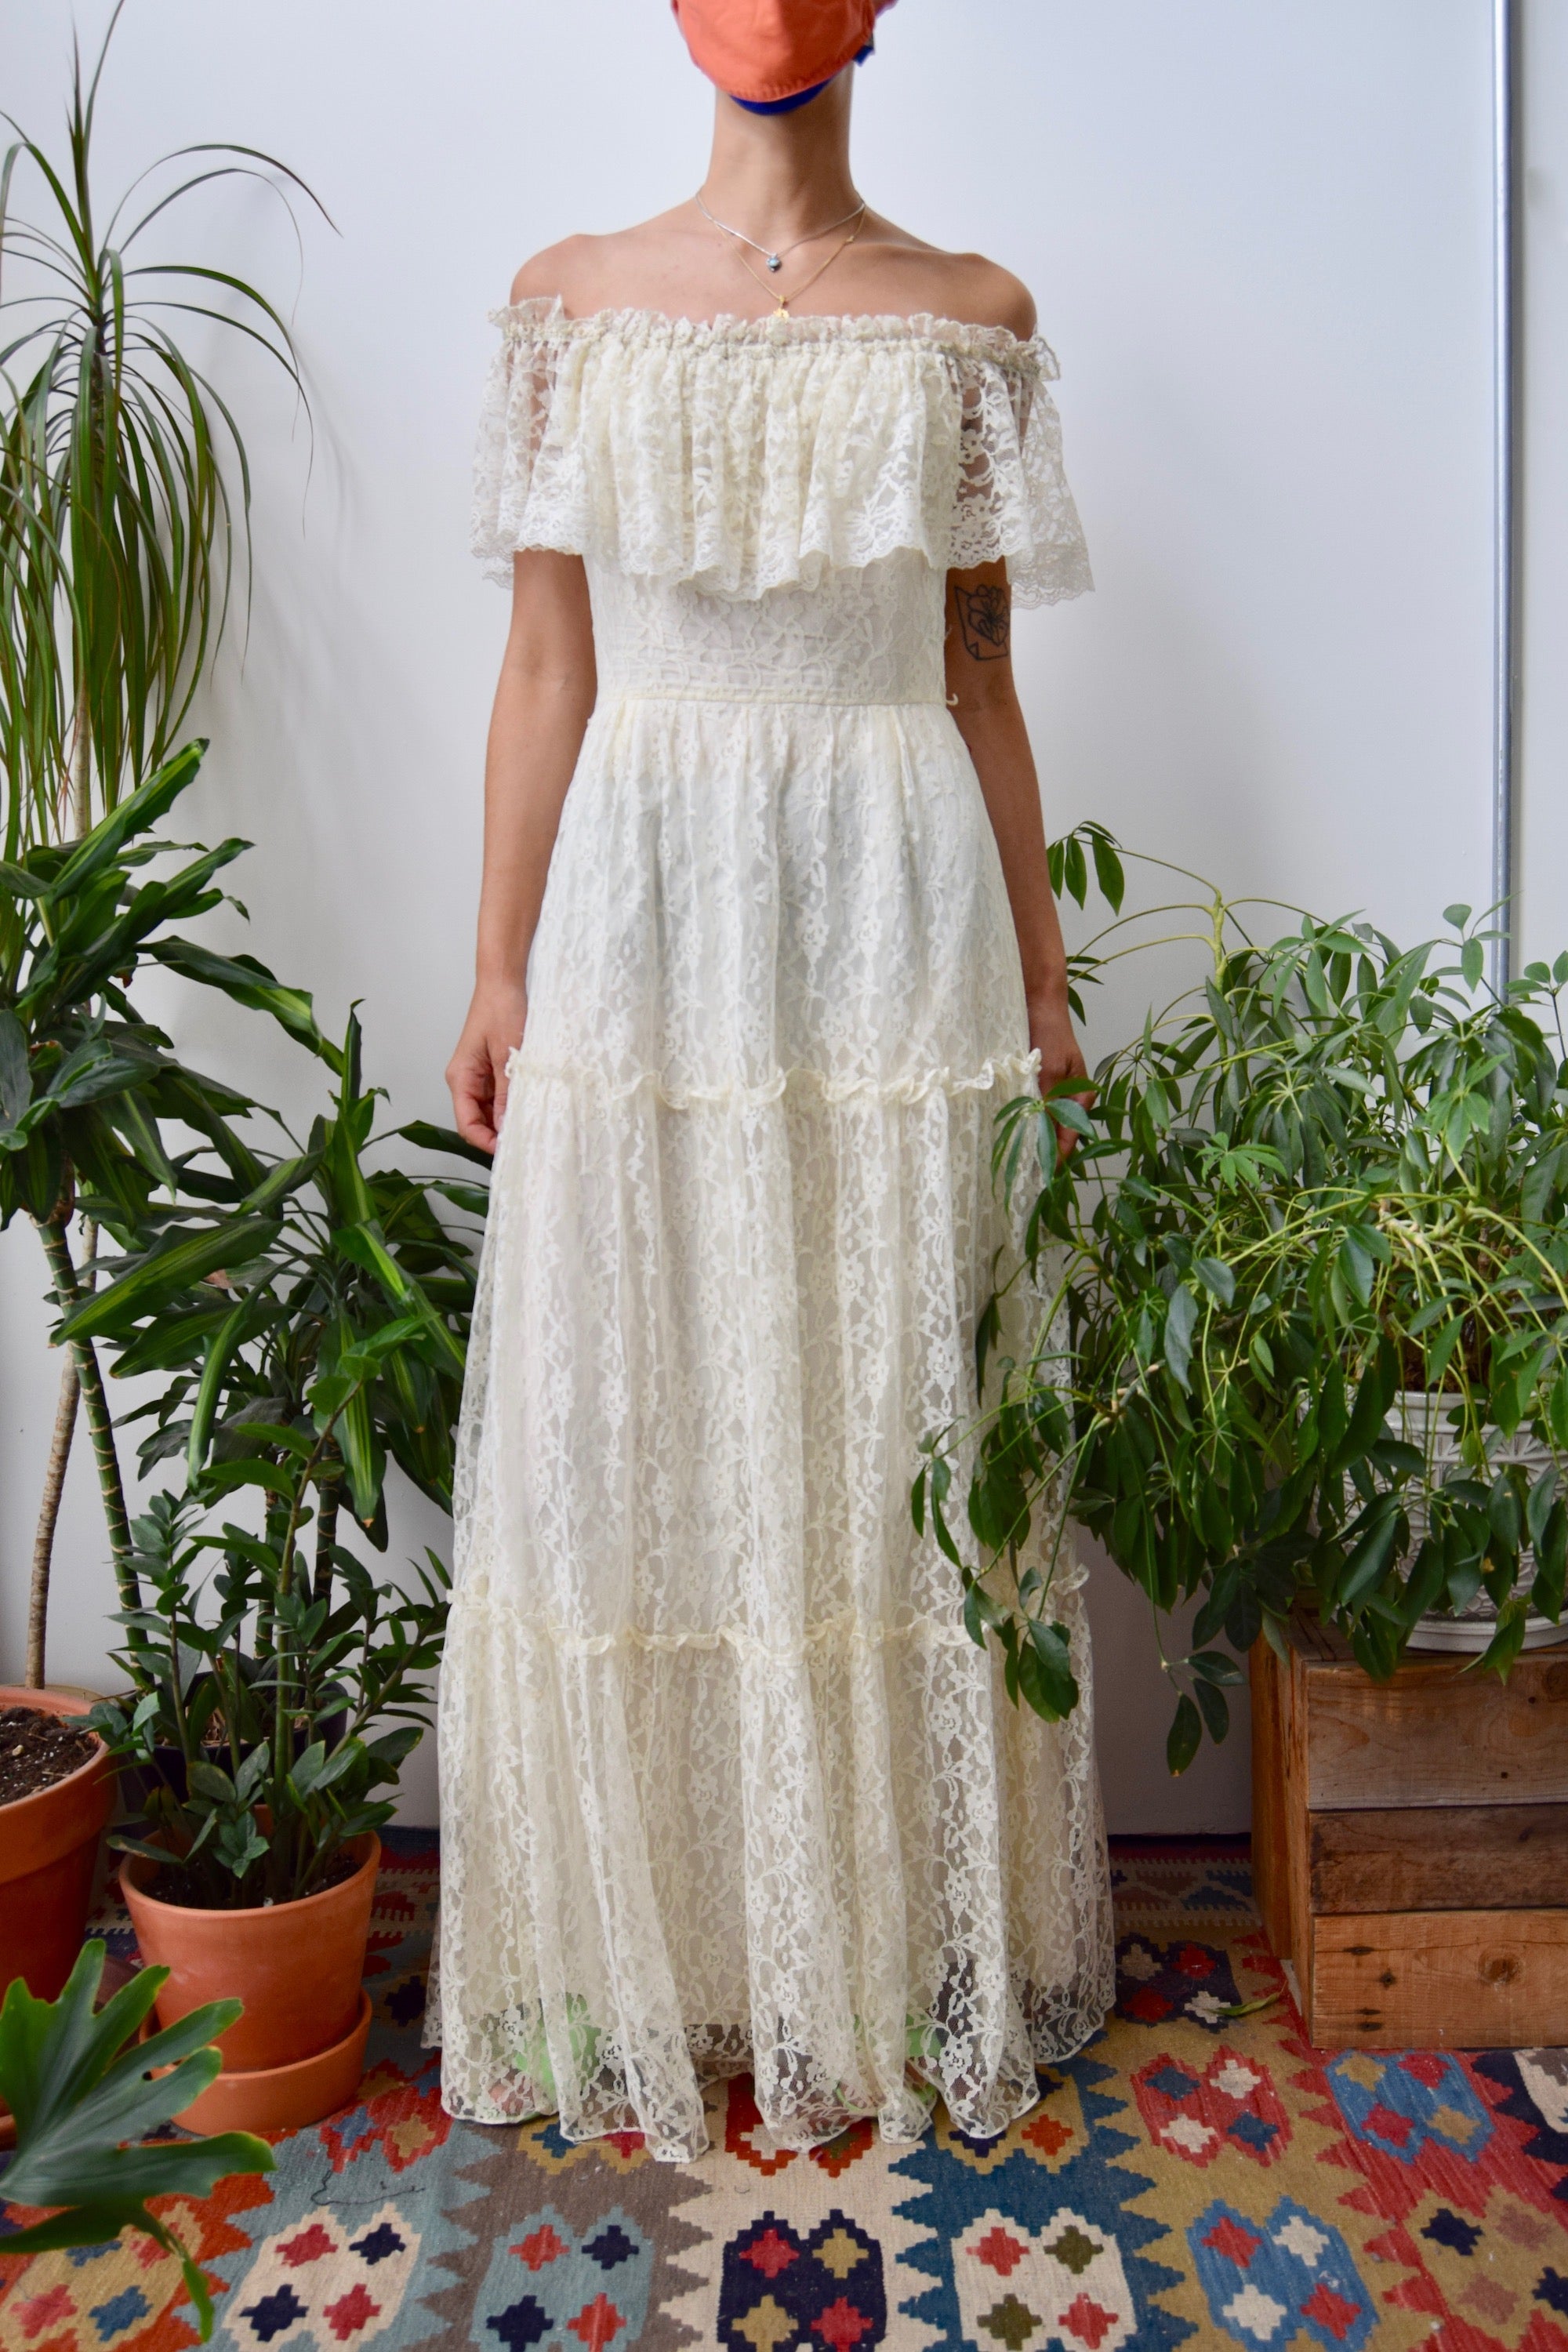 Seventies Tiered Lace Dress